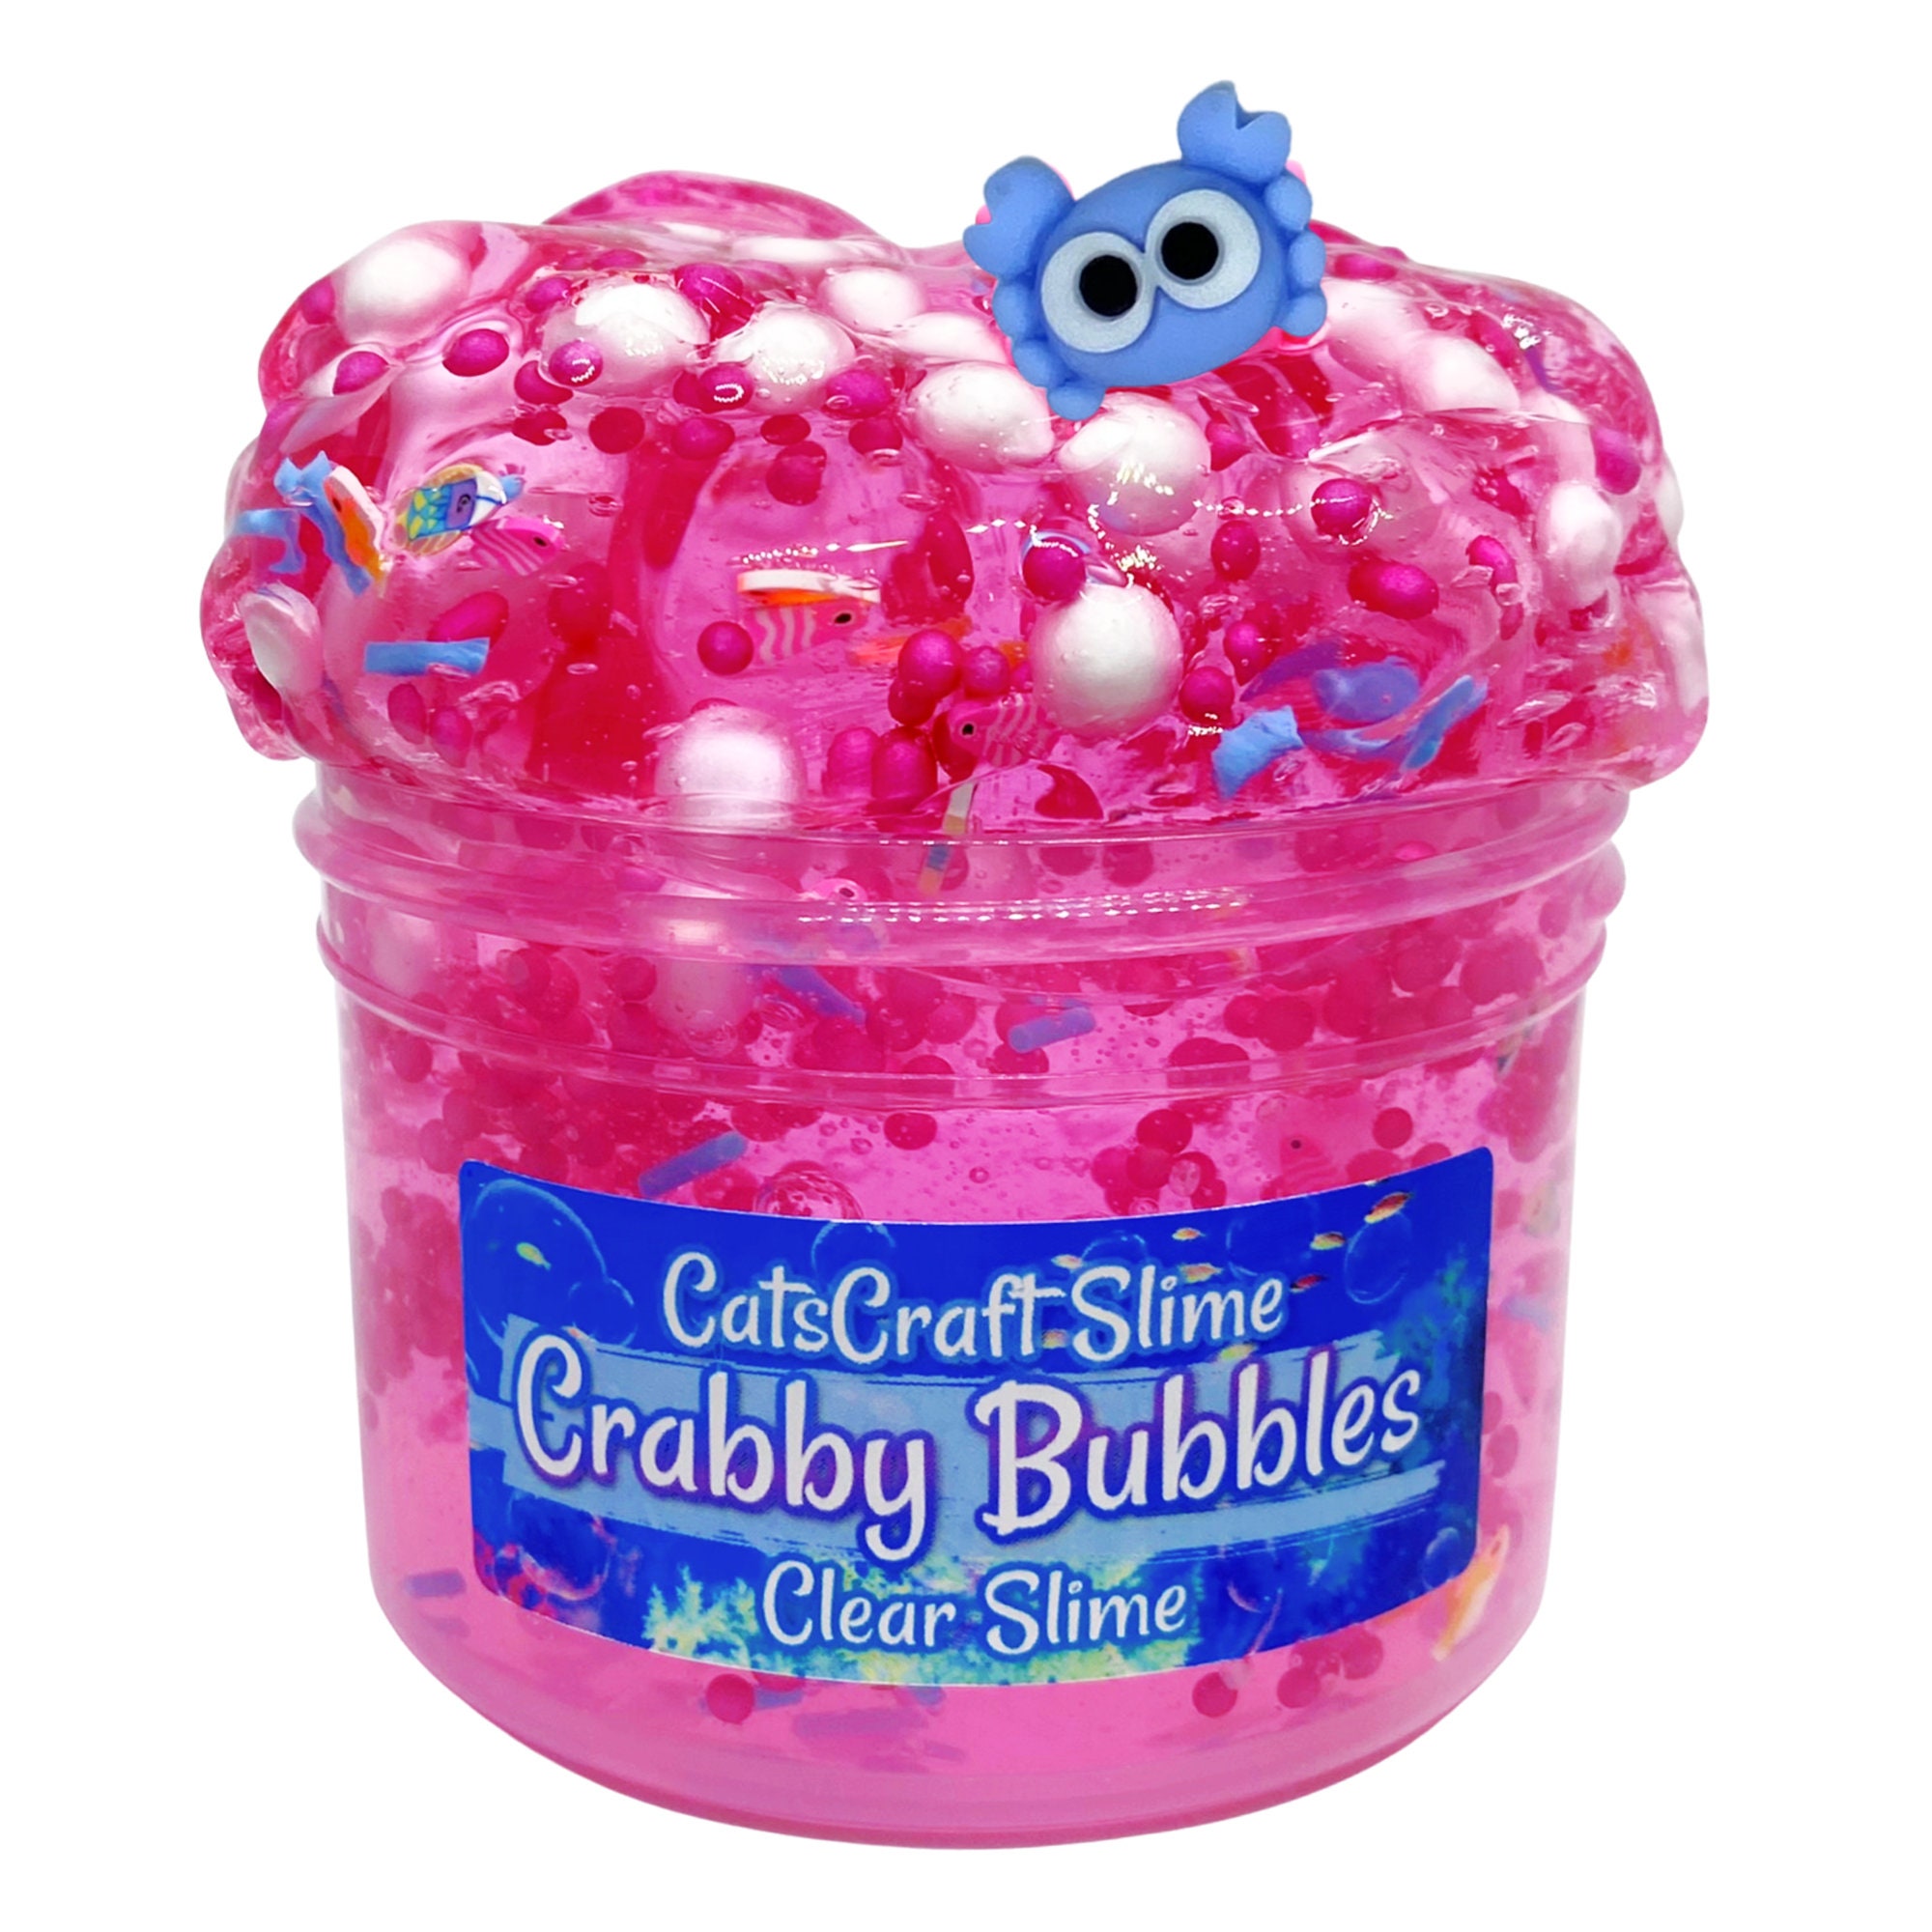  Bubble Bands - Stretchy, Squishy, Easy to Make, Craft